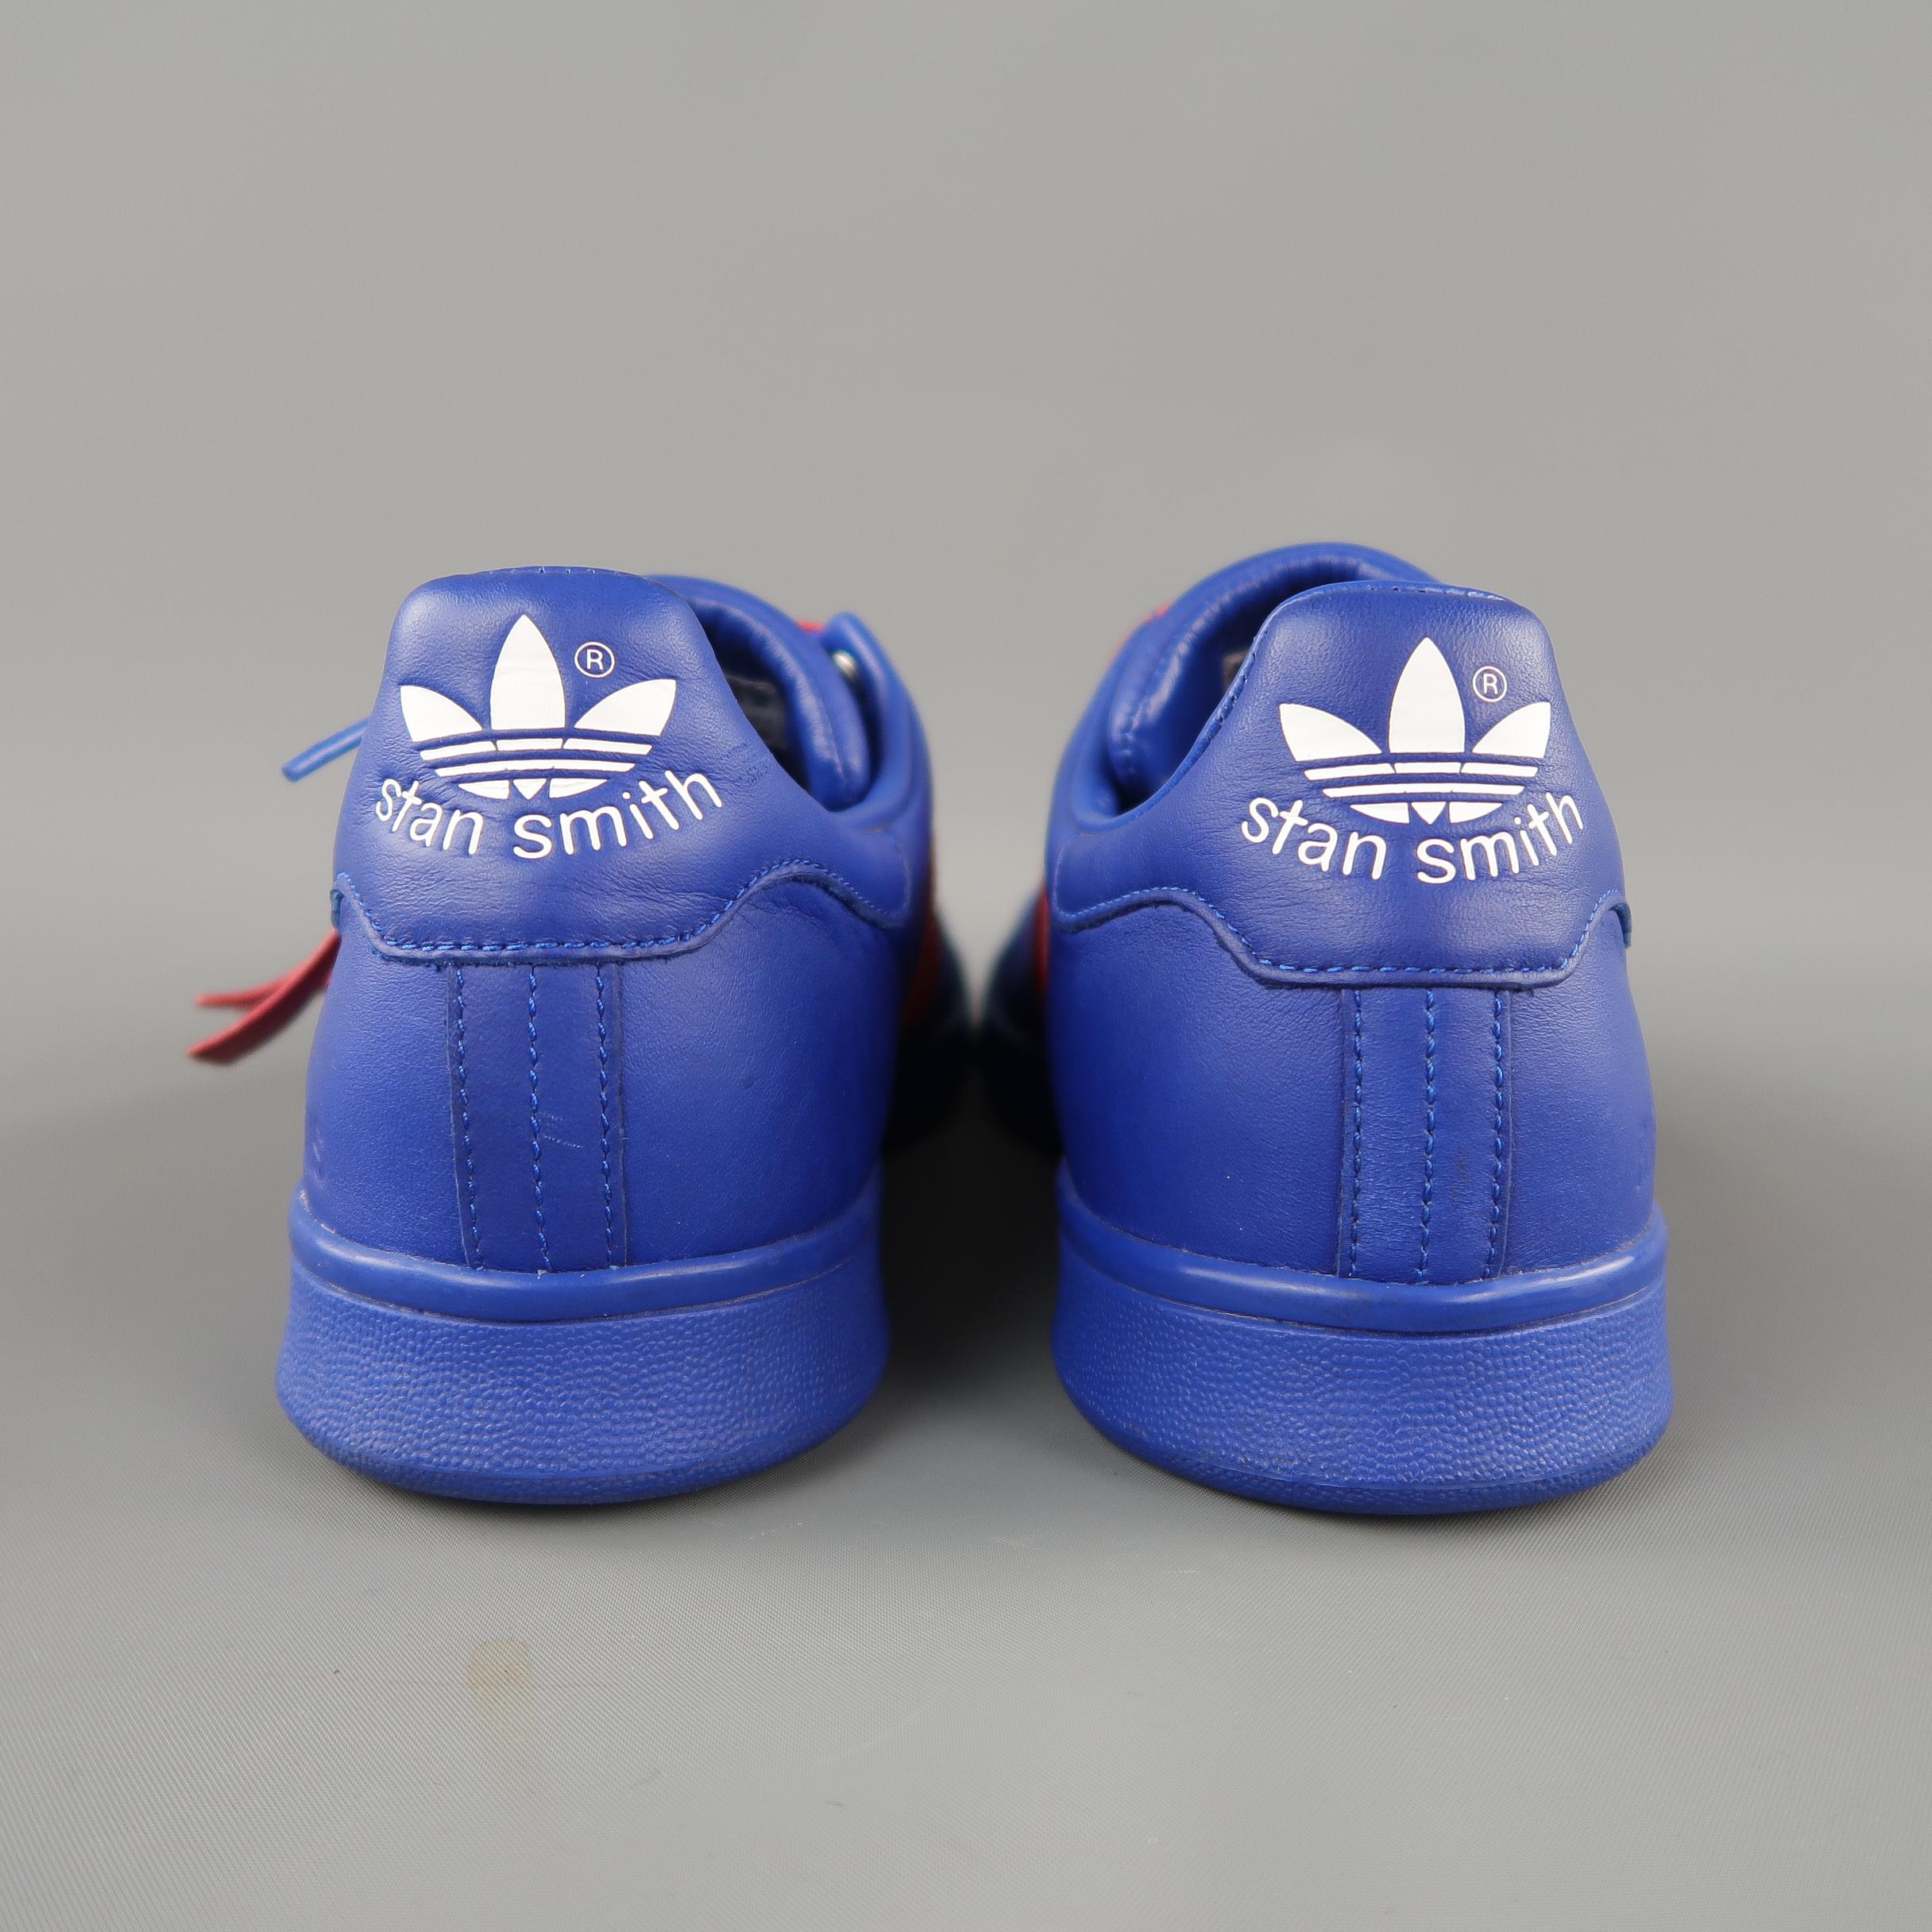 ADIDAS x RAF SIMONS Size 9.5 Royal Blue & Red Leather Stan Smith Sneakers 2